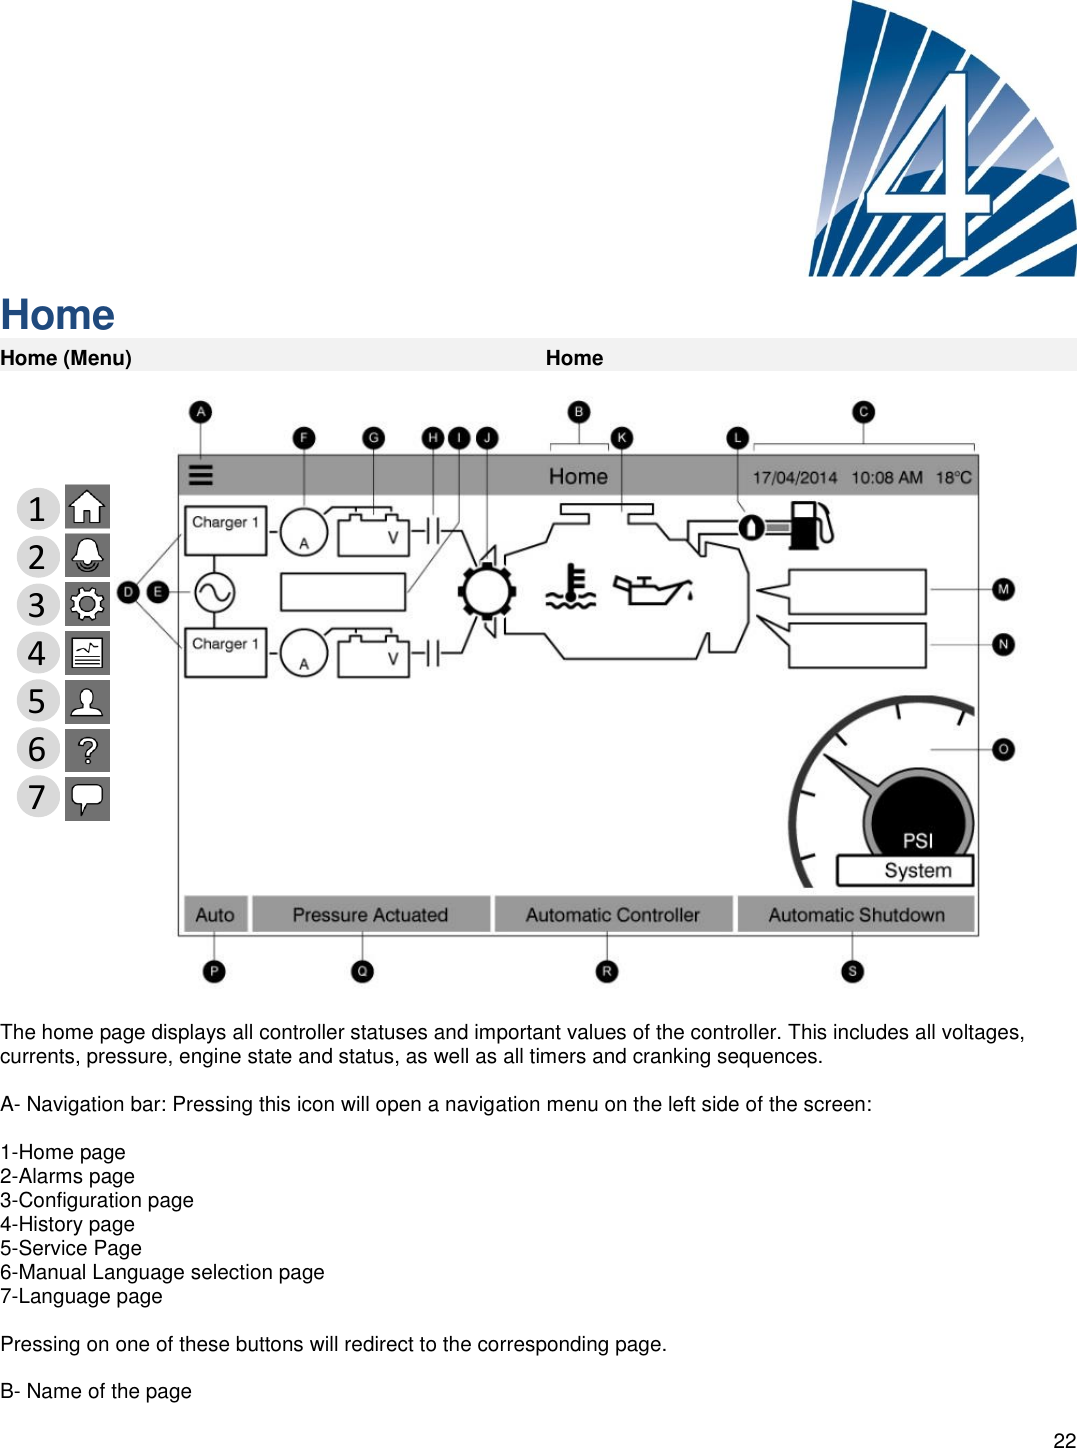    22      Home Home (Menu) Home  The home page displays all controller statuses and important values of the controller. This includes all voltages, currents, pressure, engine state and status, as well as all timers and cranking sequences.  A- Navigation bar: Pressing this icon will open a navigation menu on the left side of the screen:   1-Home page 2-Alarms page 3-Configuration page 4-History page 5-Service Page 6-Manual Language selection page 7-Language page  Pressing on one of these buttons will redirect to the corresponding page.  B- Name of the page  1 2 3 4 5 6 7 